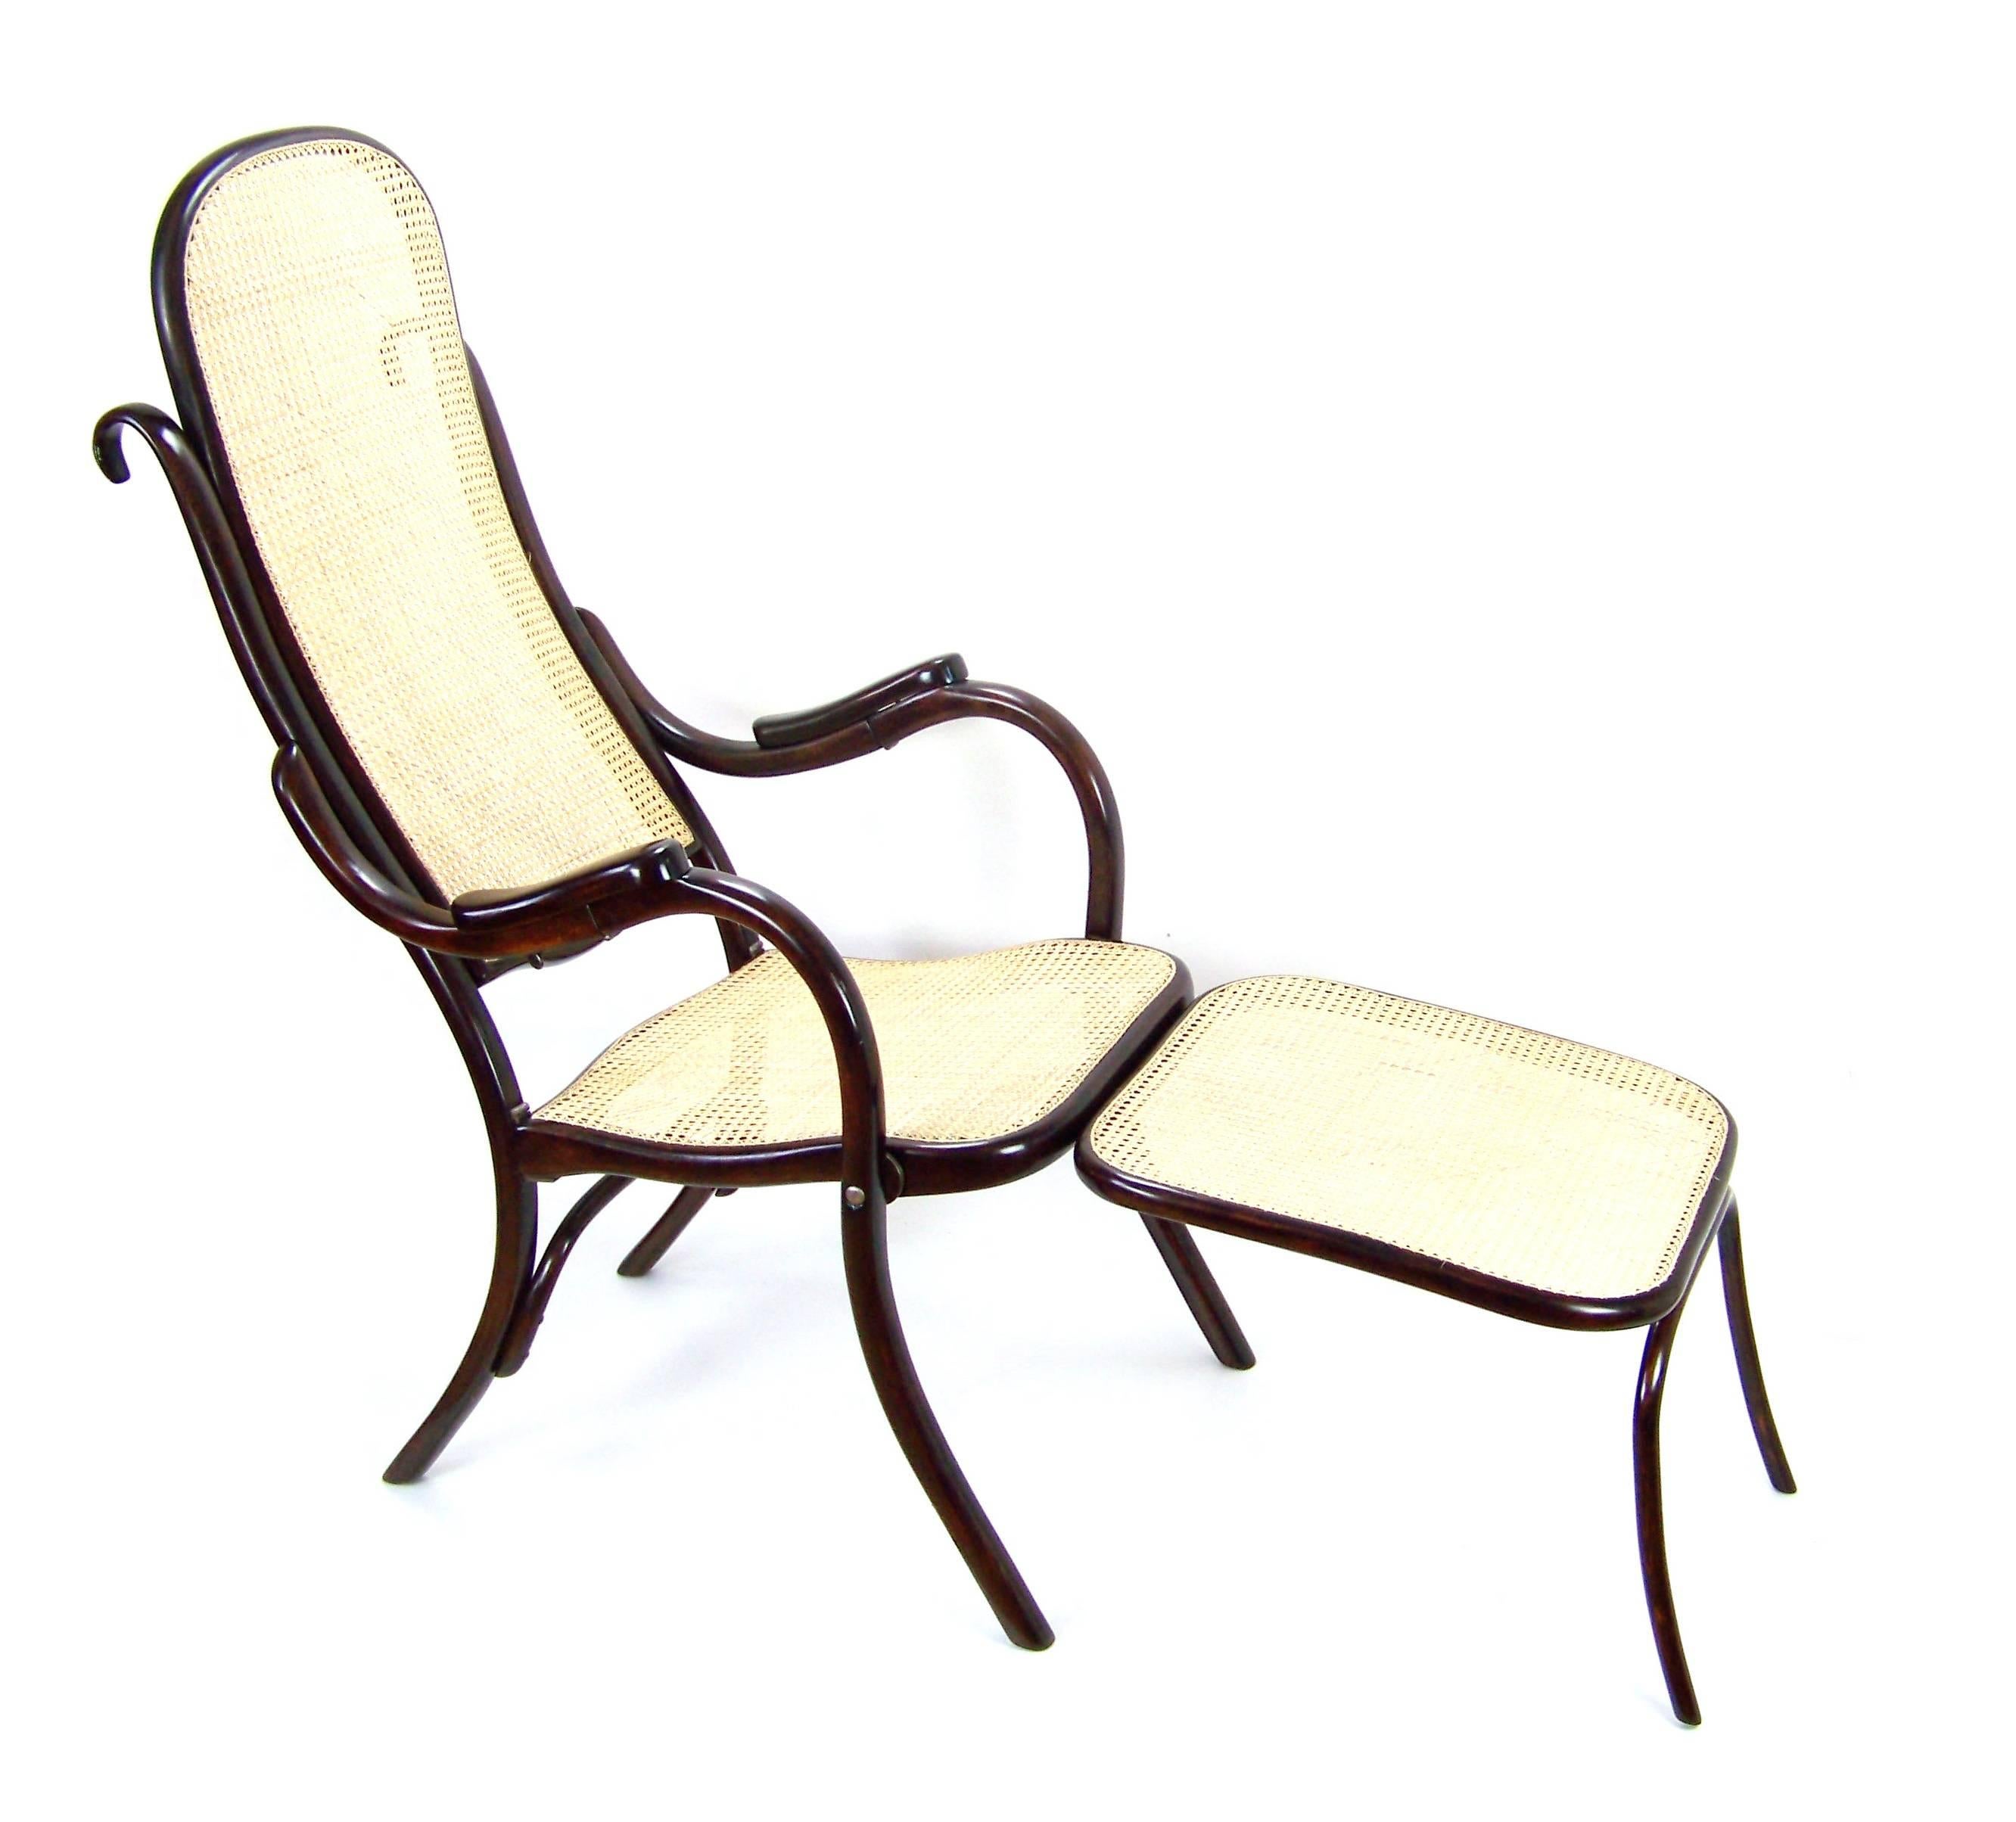 Manufactured in Austria by the Gebrüder Thonet Company. Marked with stamp, which is used, circa 1887-1910. Newly restored.